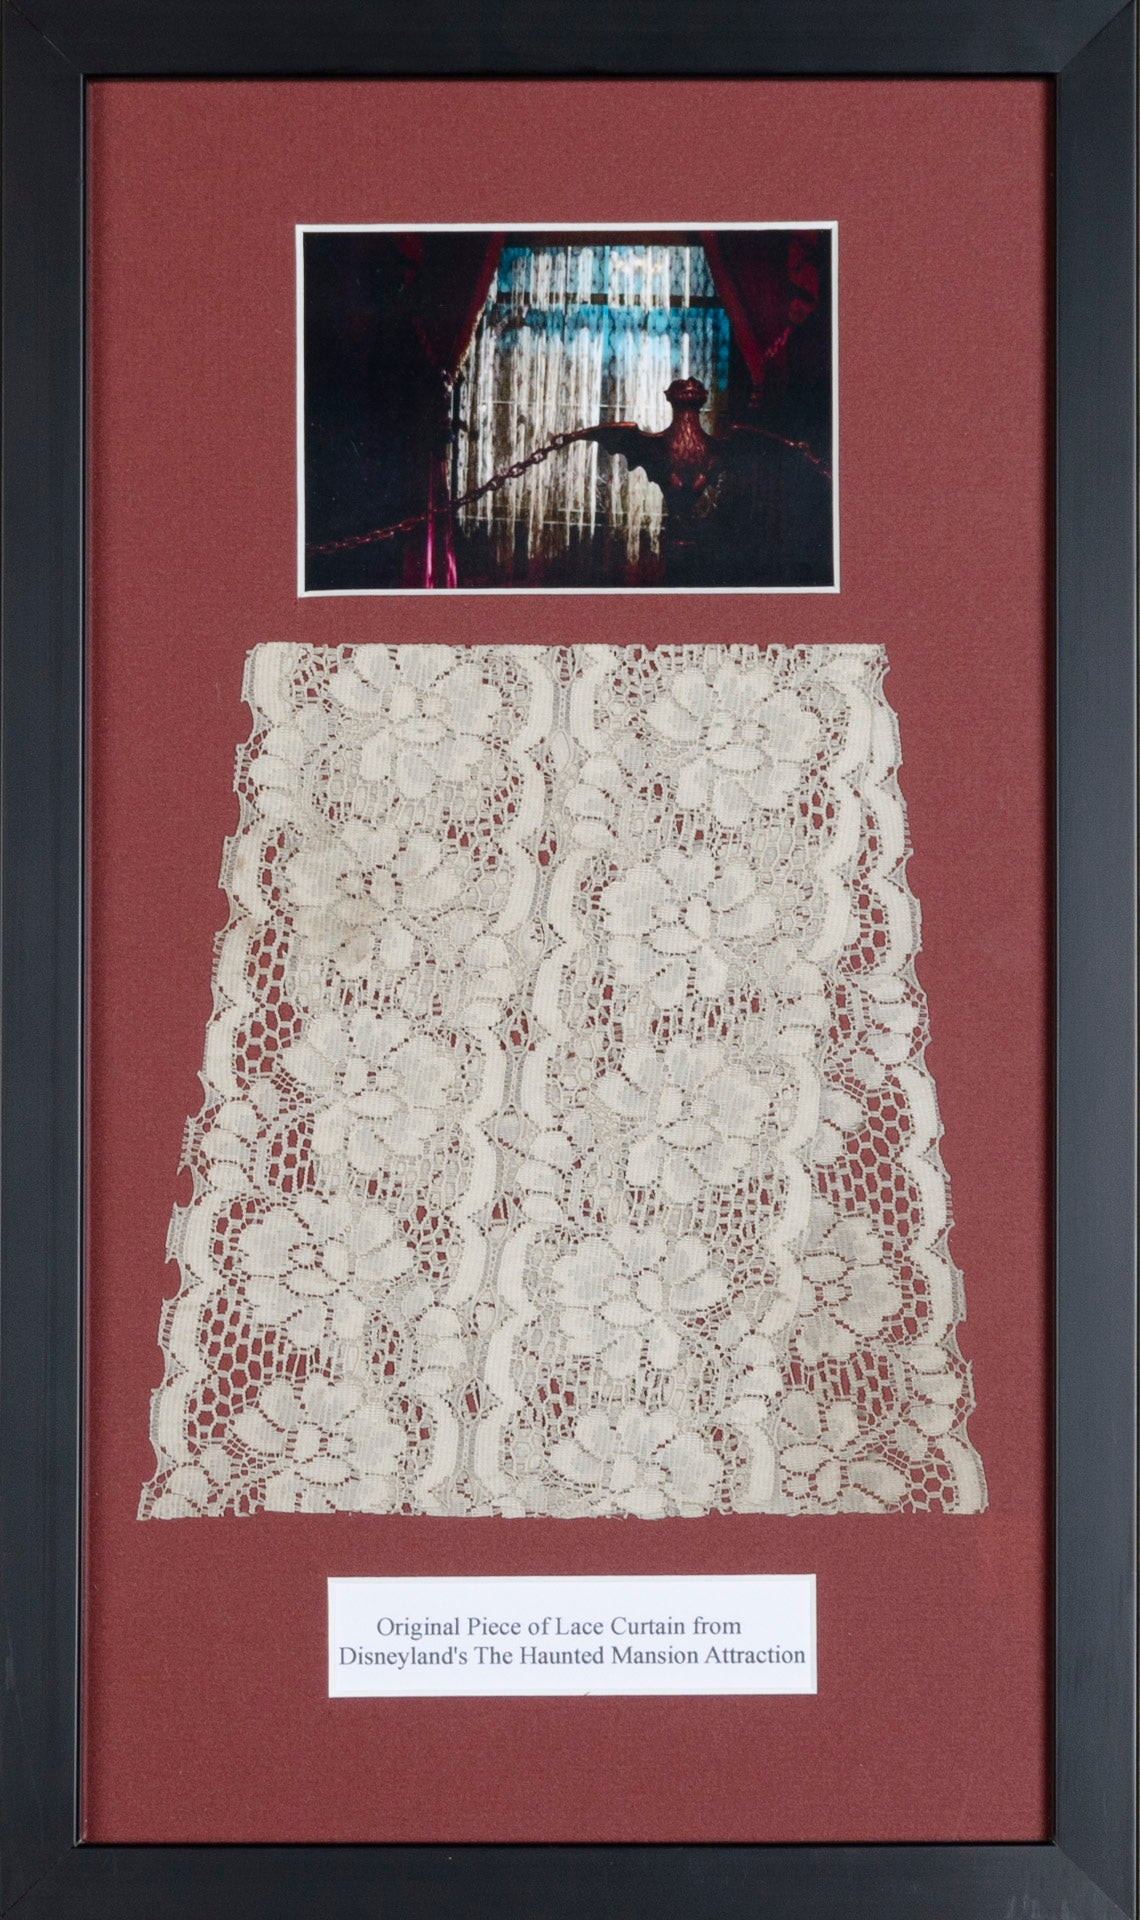 Original Piece of Lace Curtain from Disneyland's The Haunted Mansion Attraction